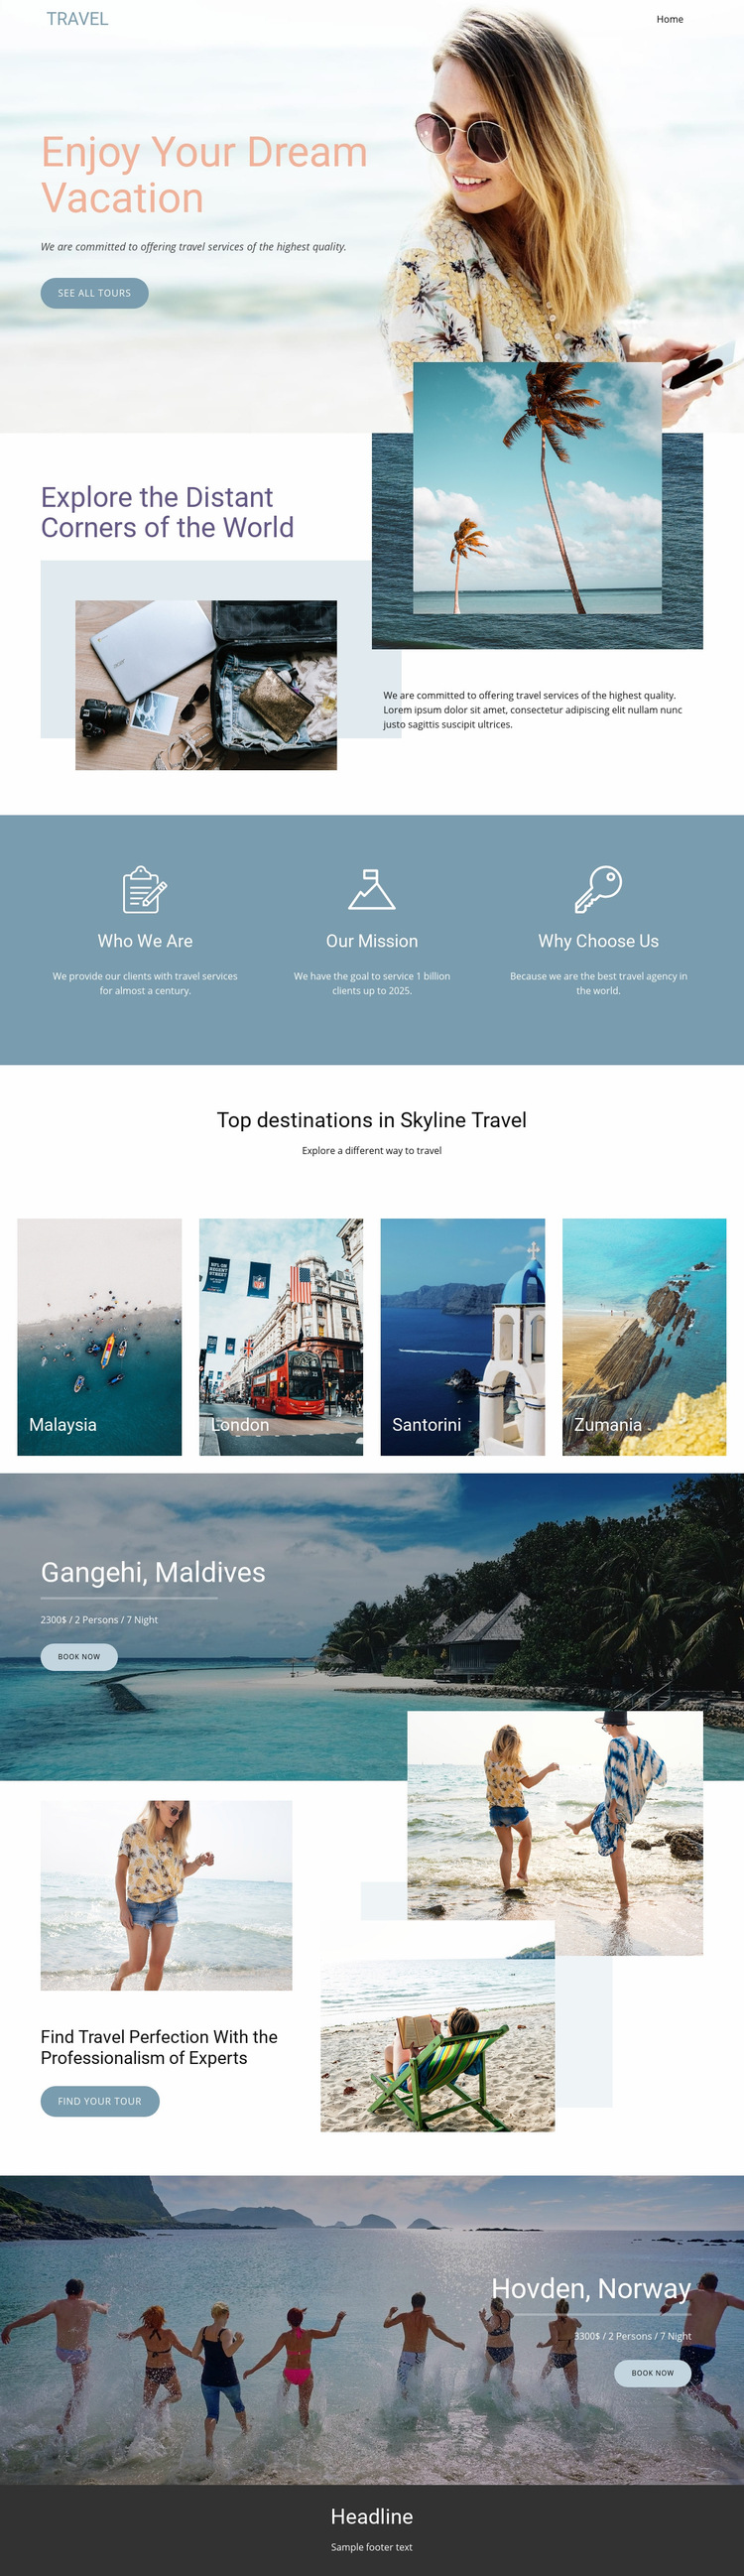 Dream Travel Agency Web Page Design